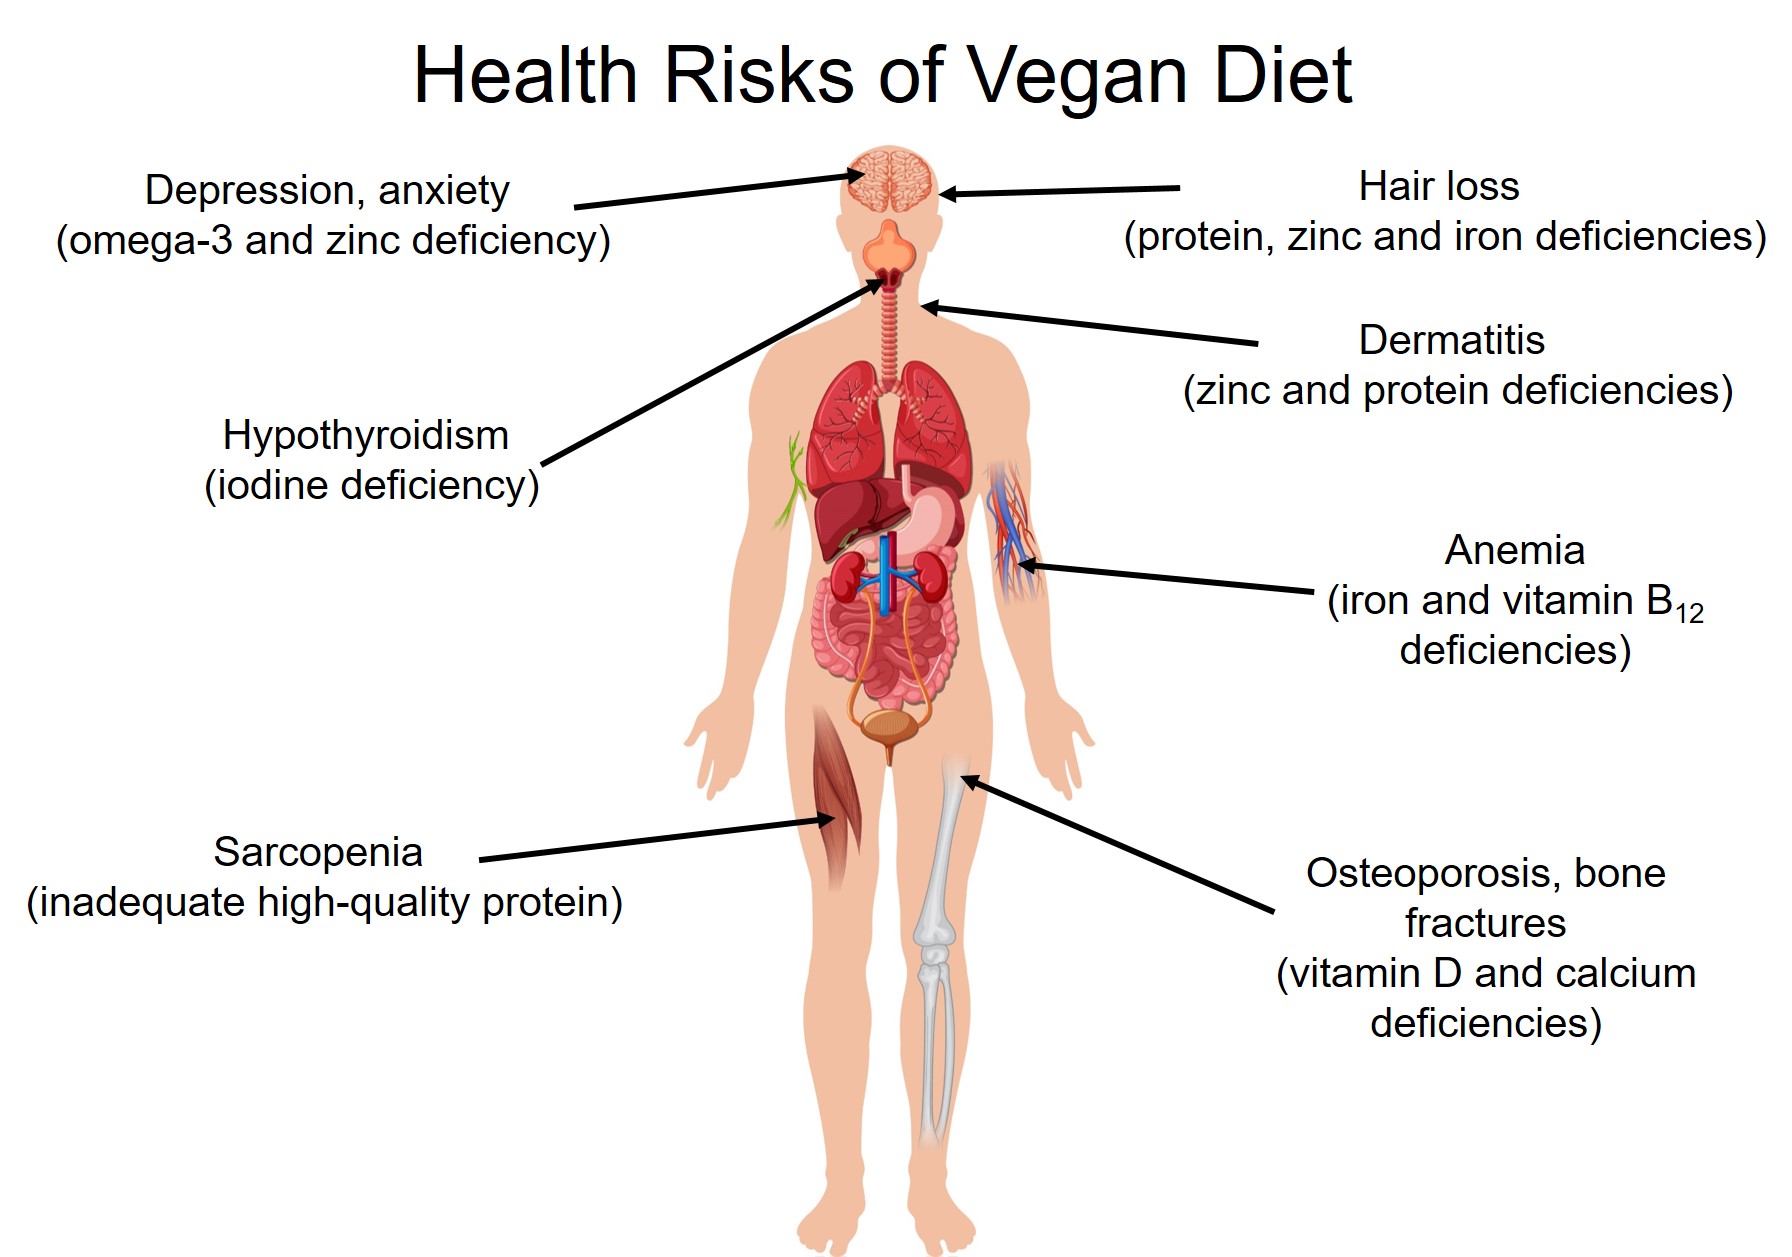 III. Debunking Myth 1: Vegans Cannot Get Enough Protein